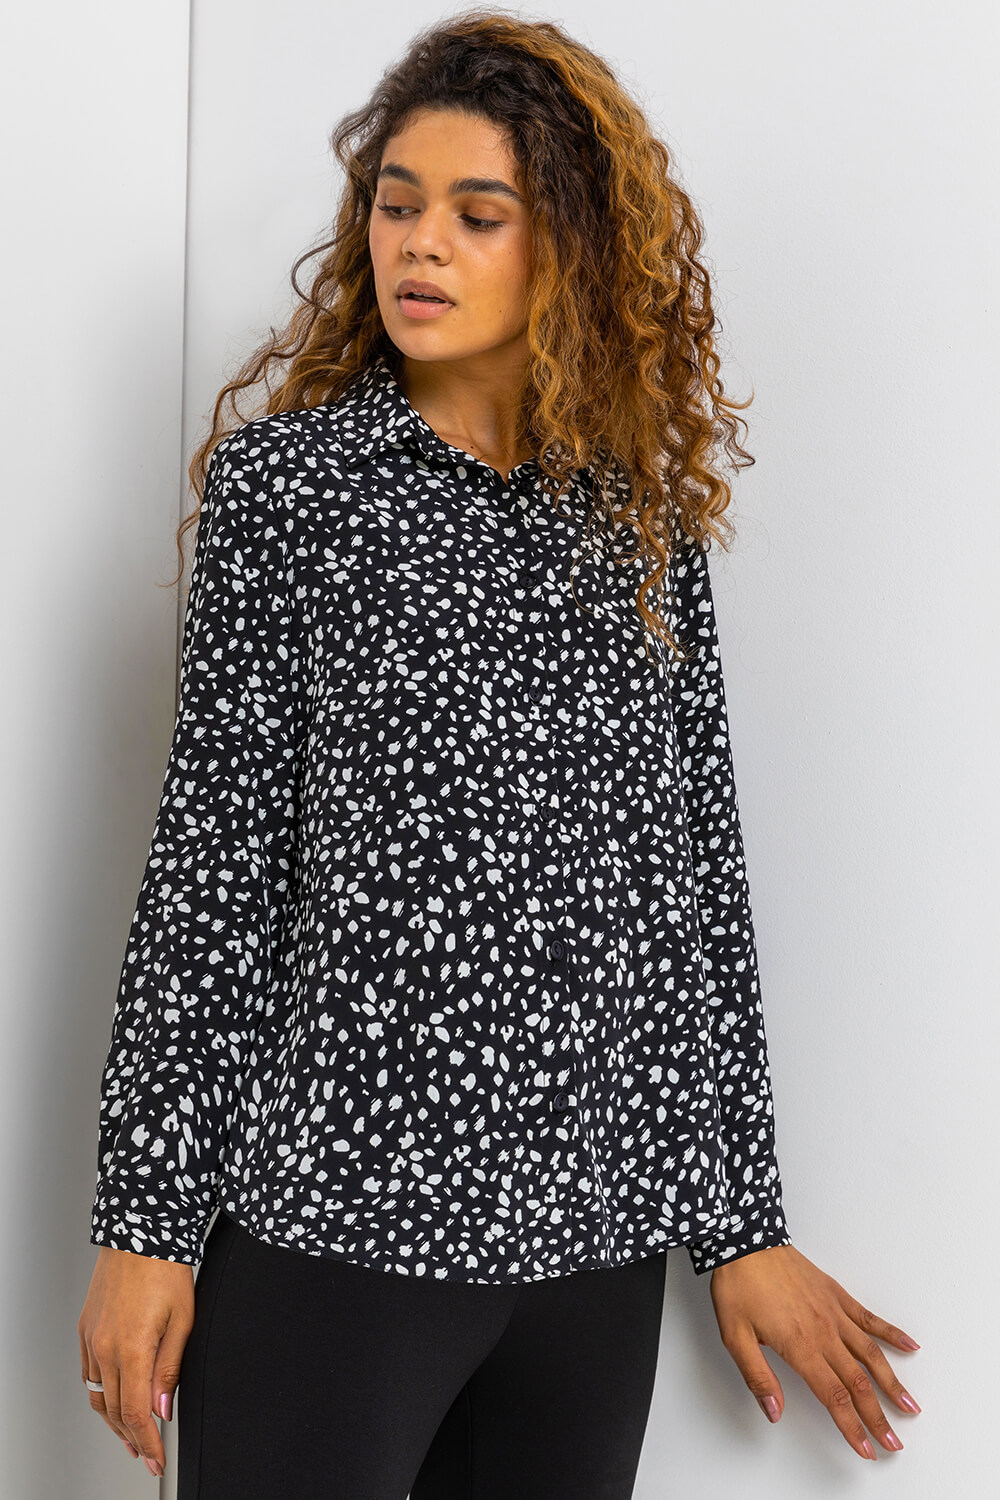 Black Abstract Spot Print Blouse, Image 4 of 5